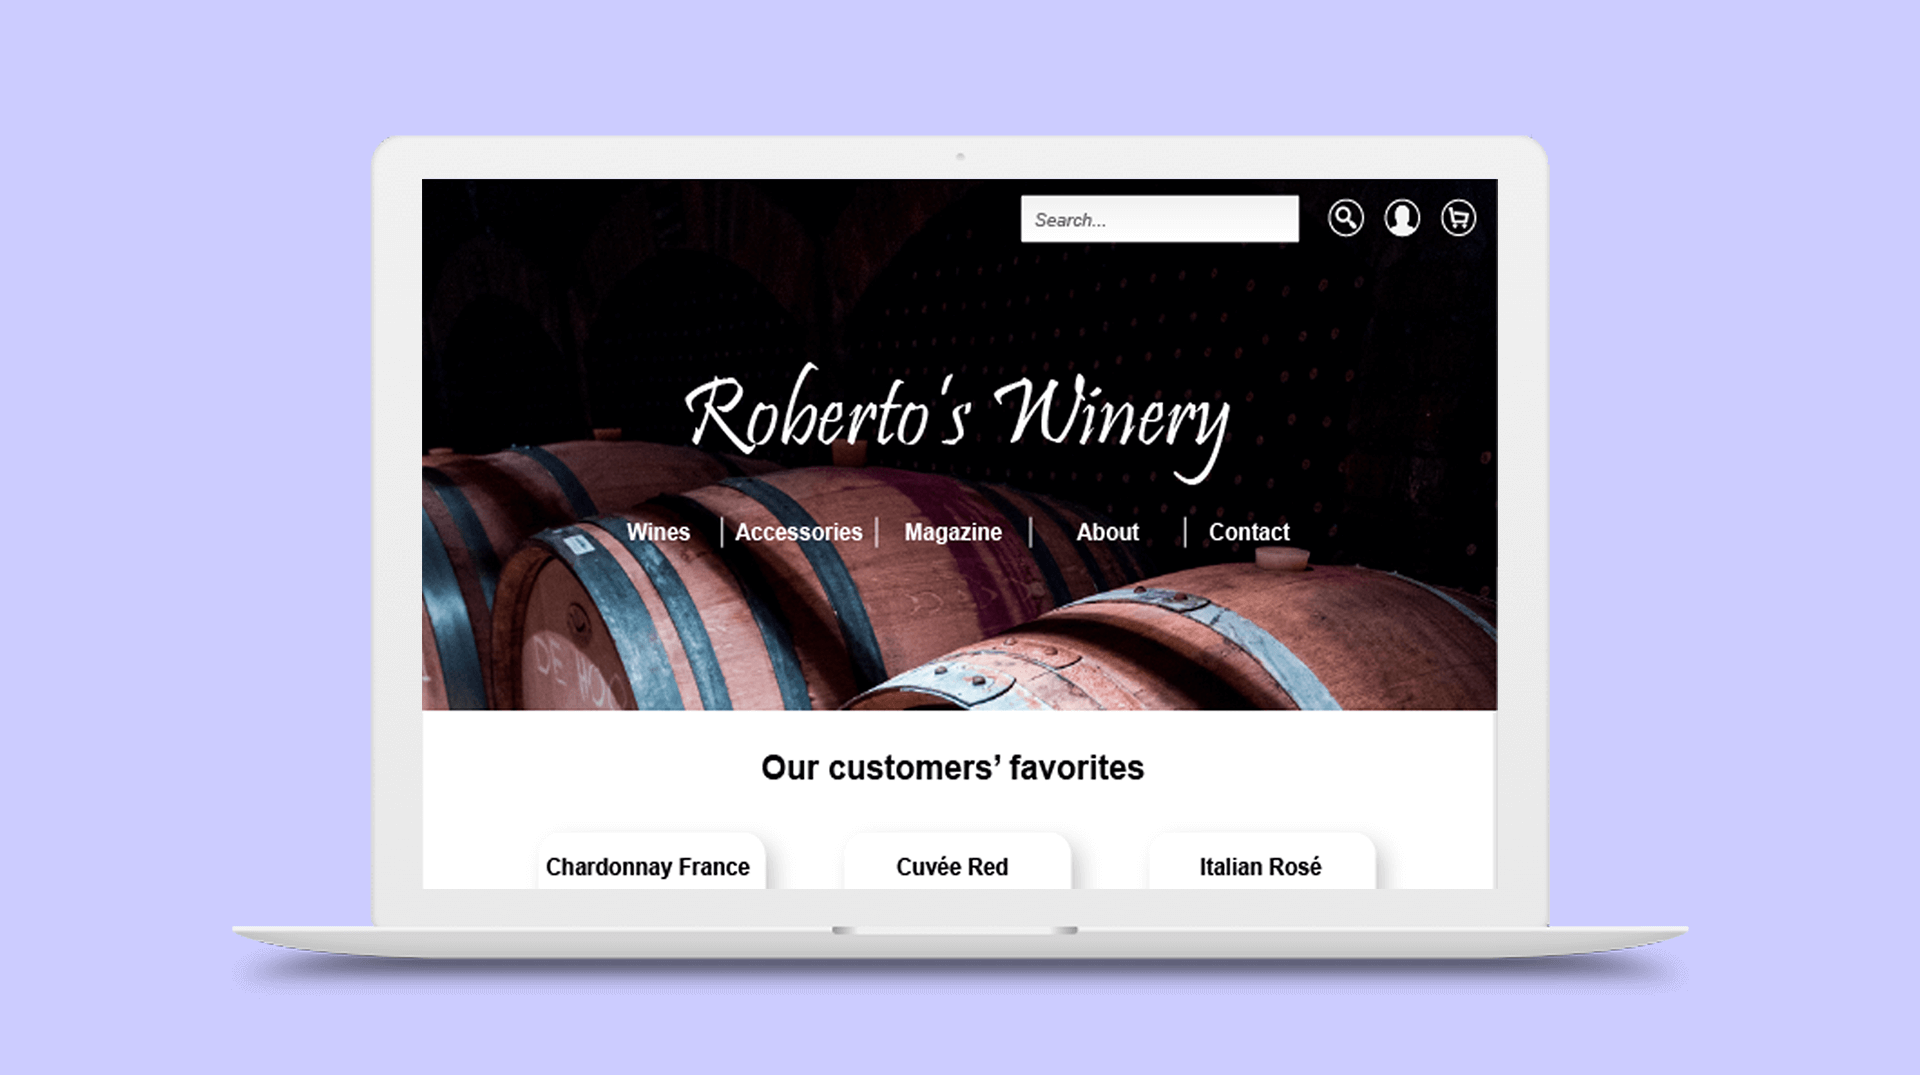 Responsive image about the wine webshop